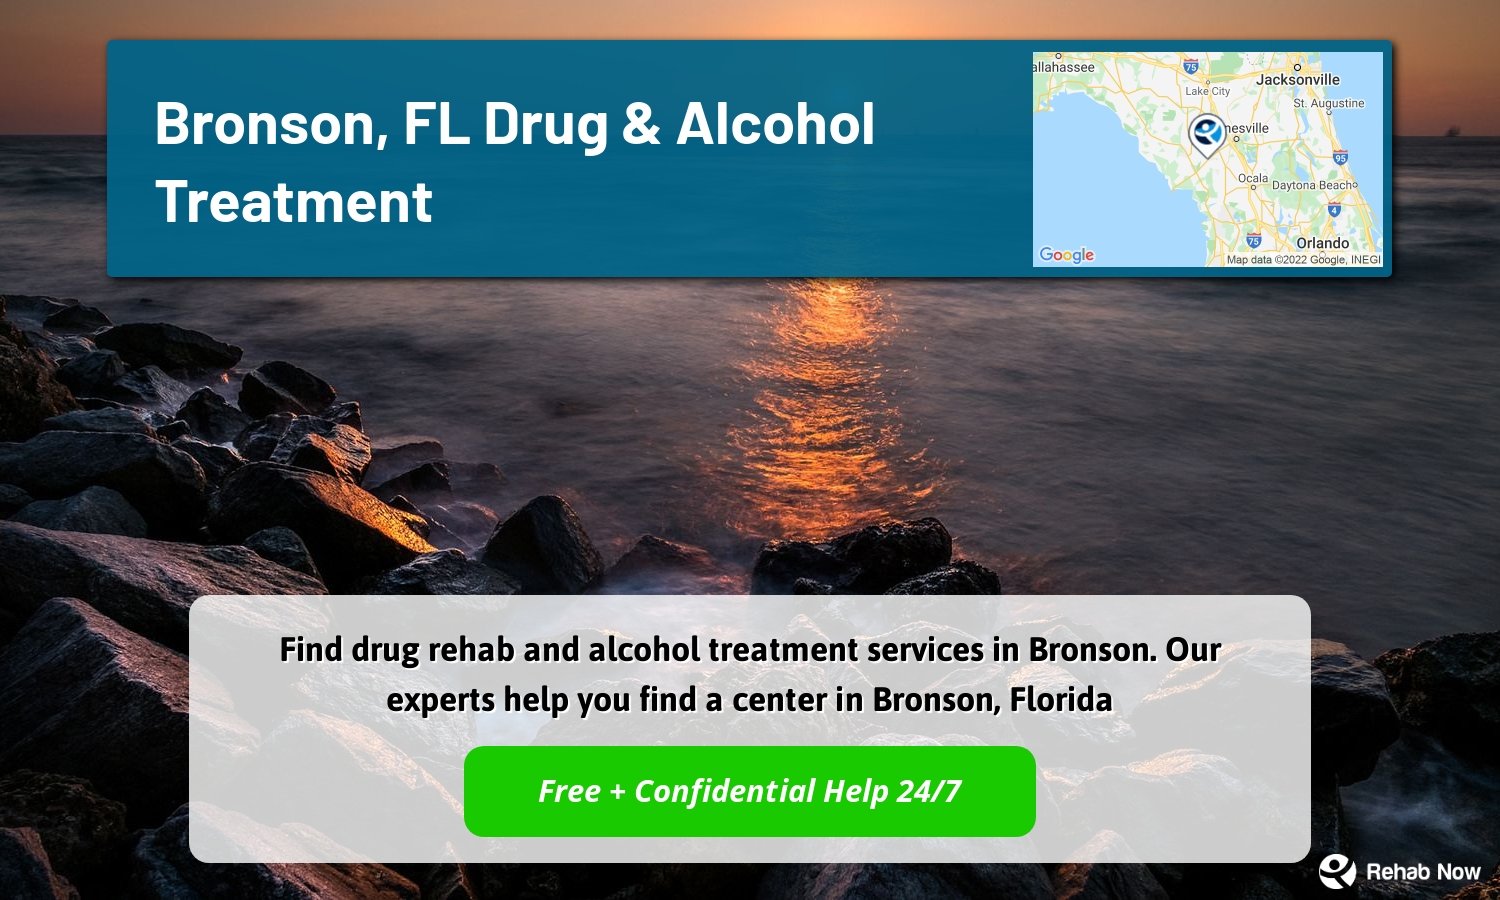 Find drug rehab and alcohol treatment services in Bronson. Our experts help you find a center in Bronson, Florida